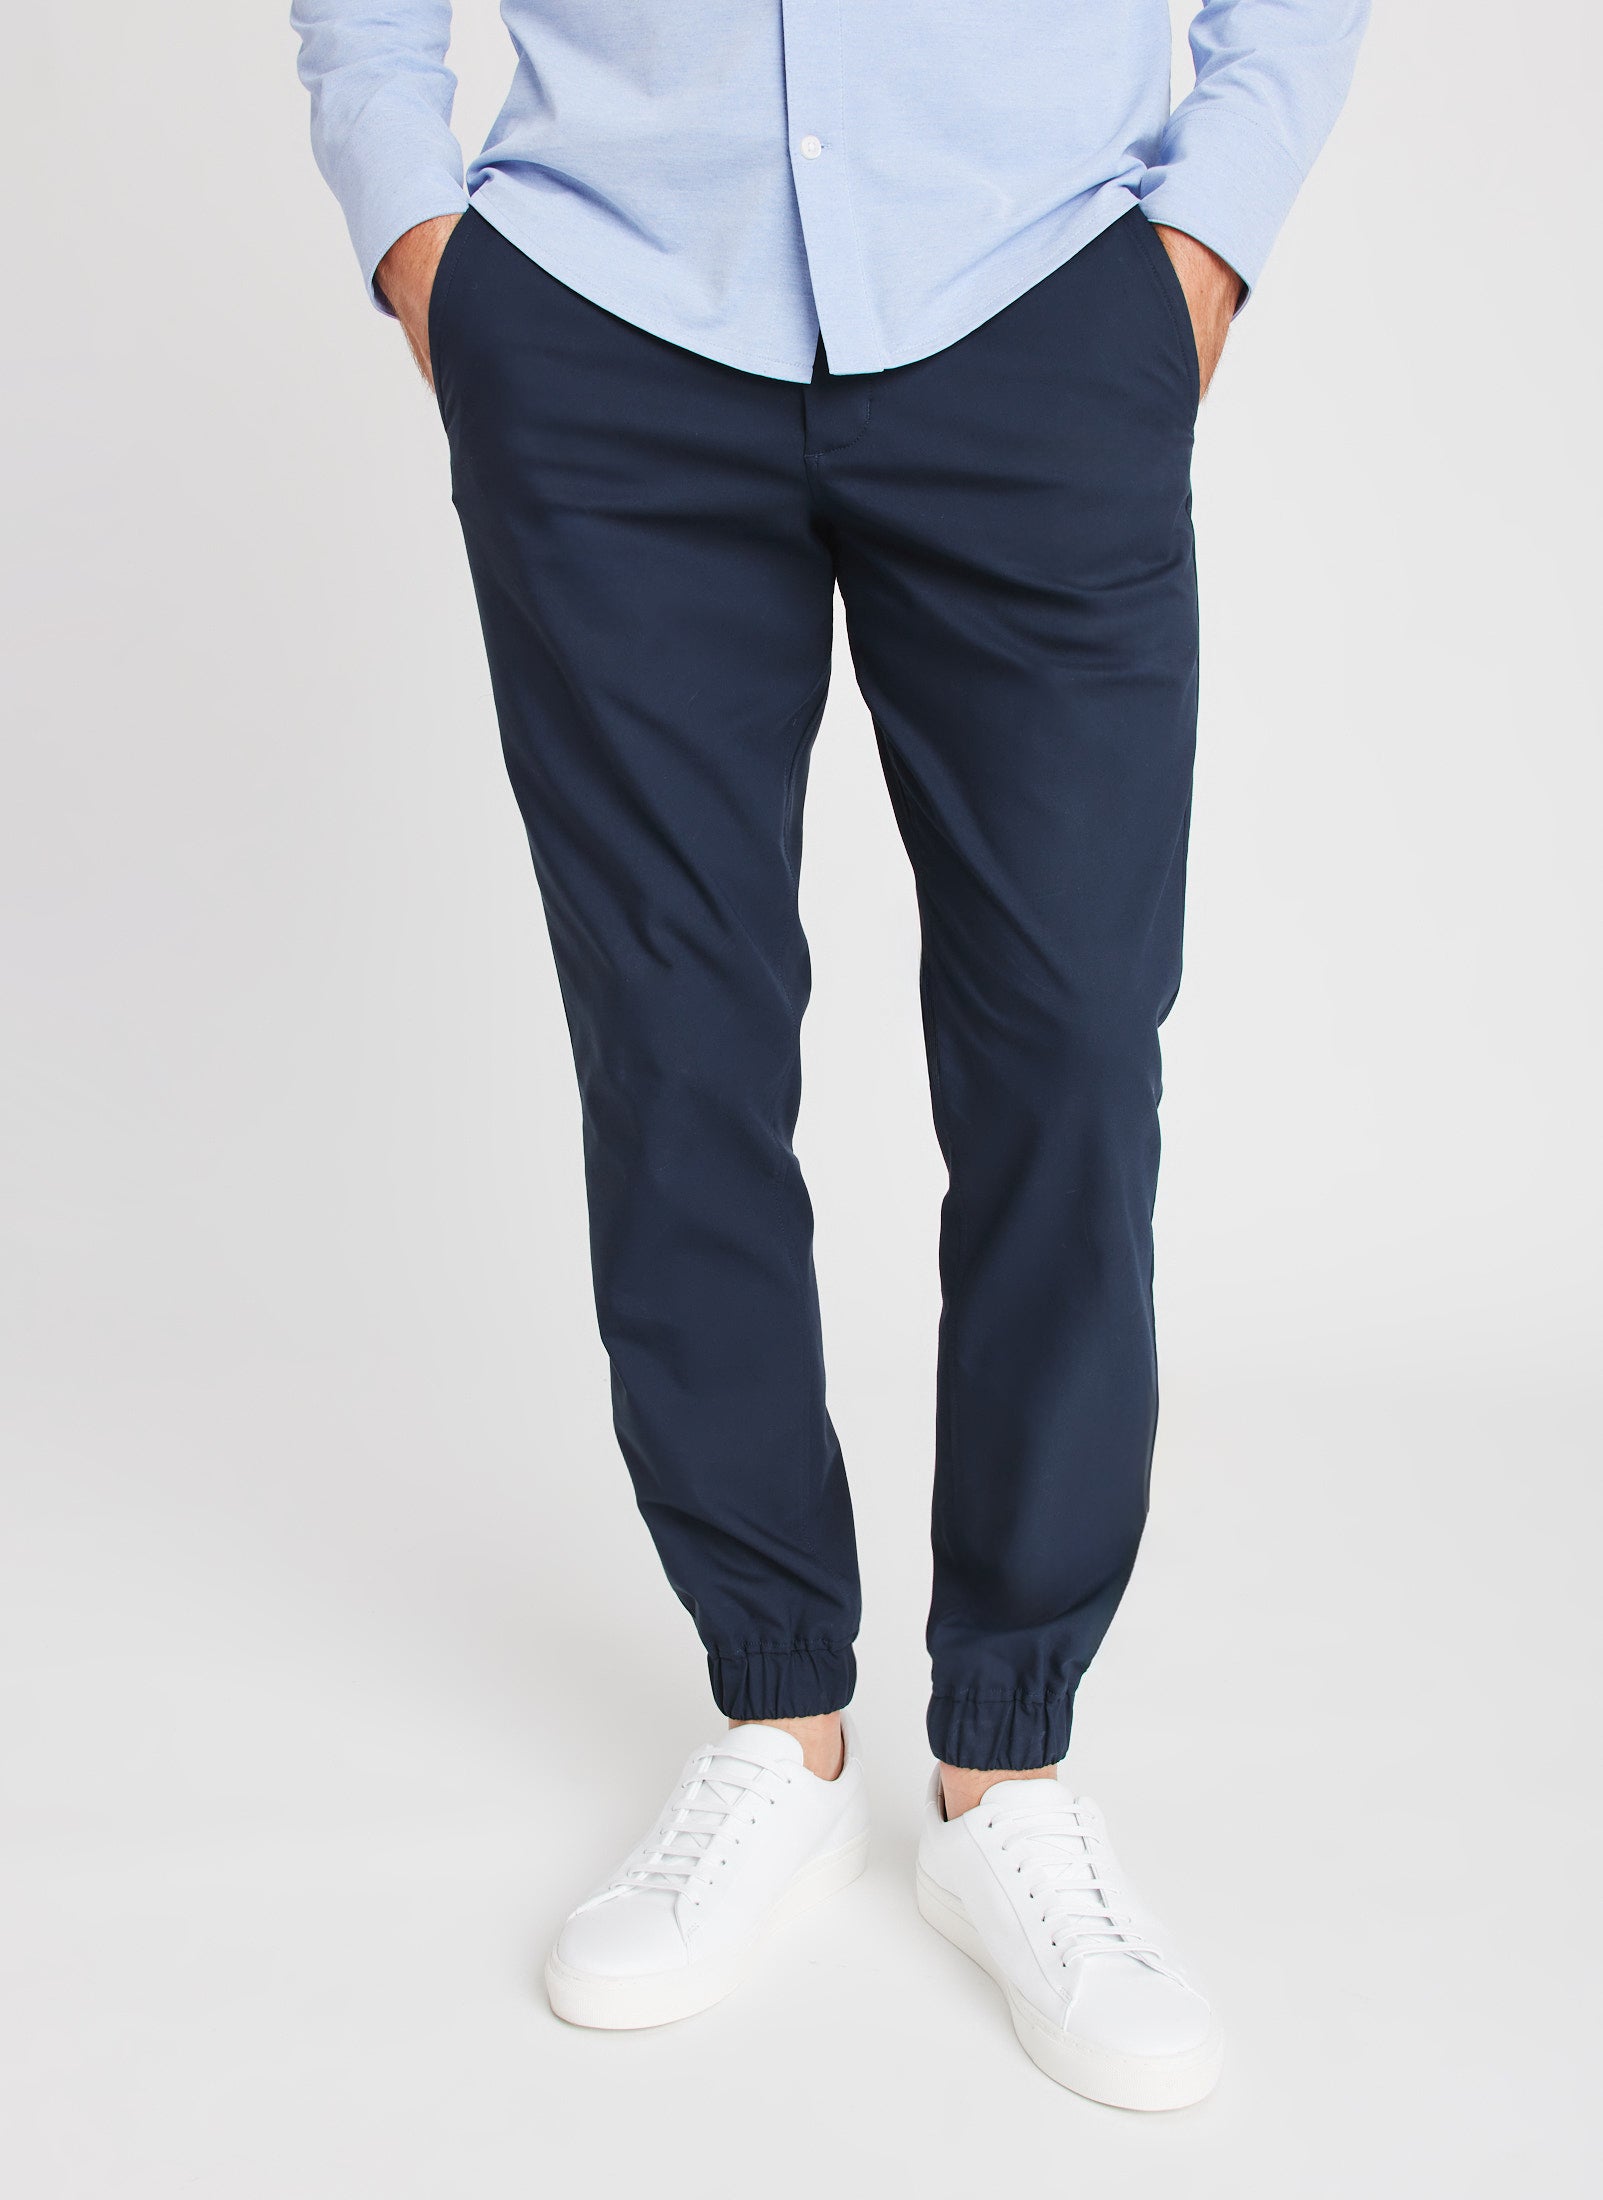 What Color Shoes With Navy Pants? (Outfit Ideas)